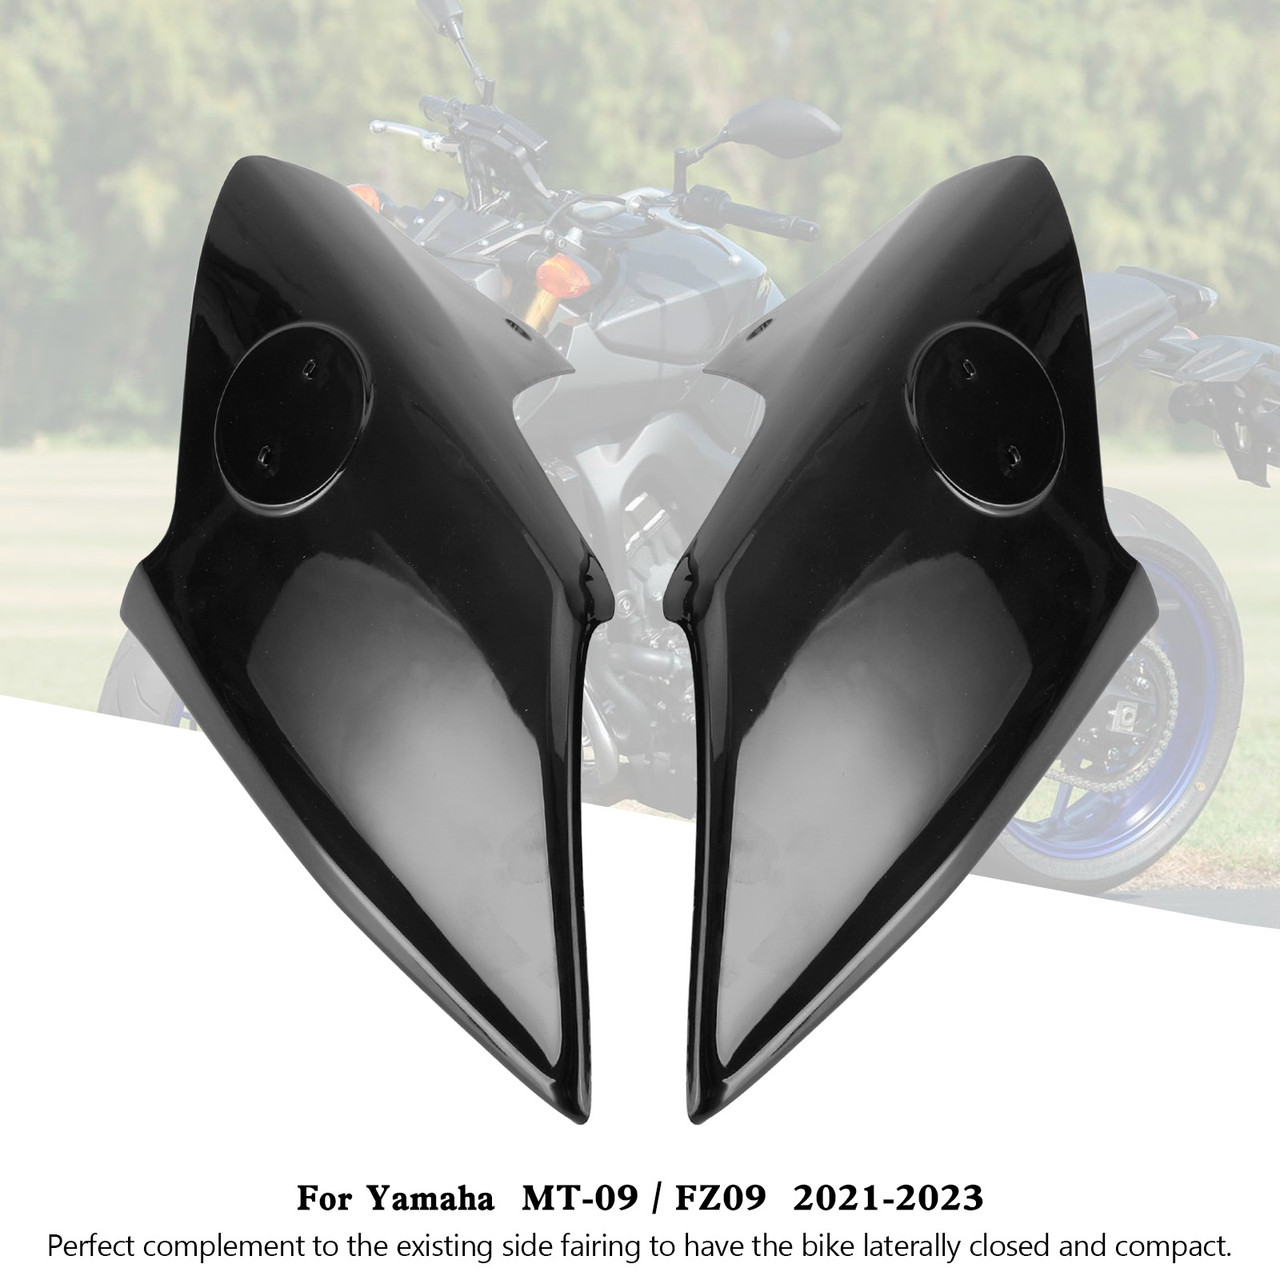 Air Intake Covers Tank Side Panel Fairing For Yamaha MT-09 FZ09 2021-2023 BLK